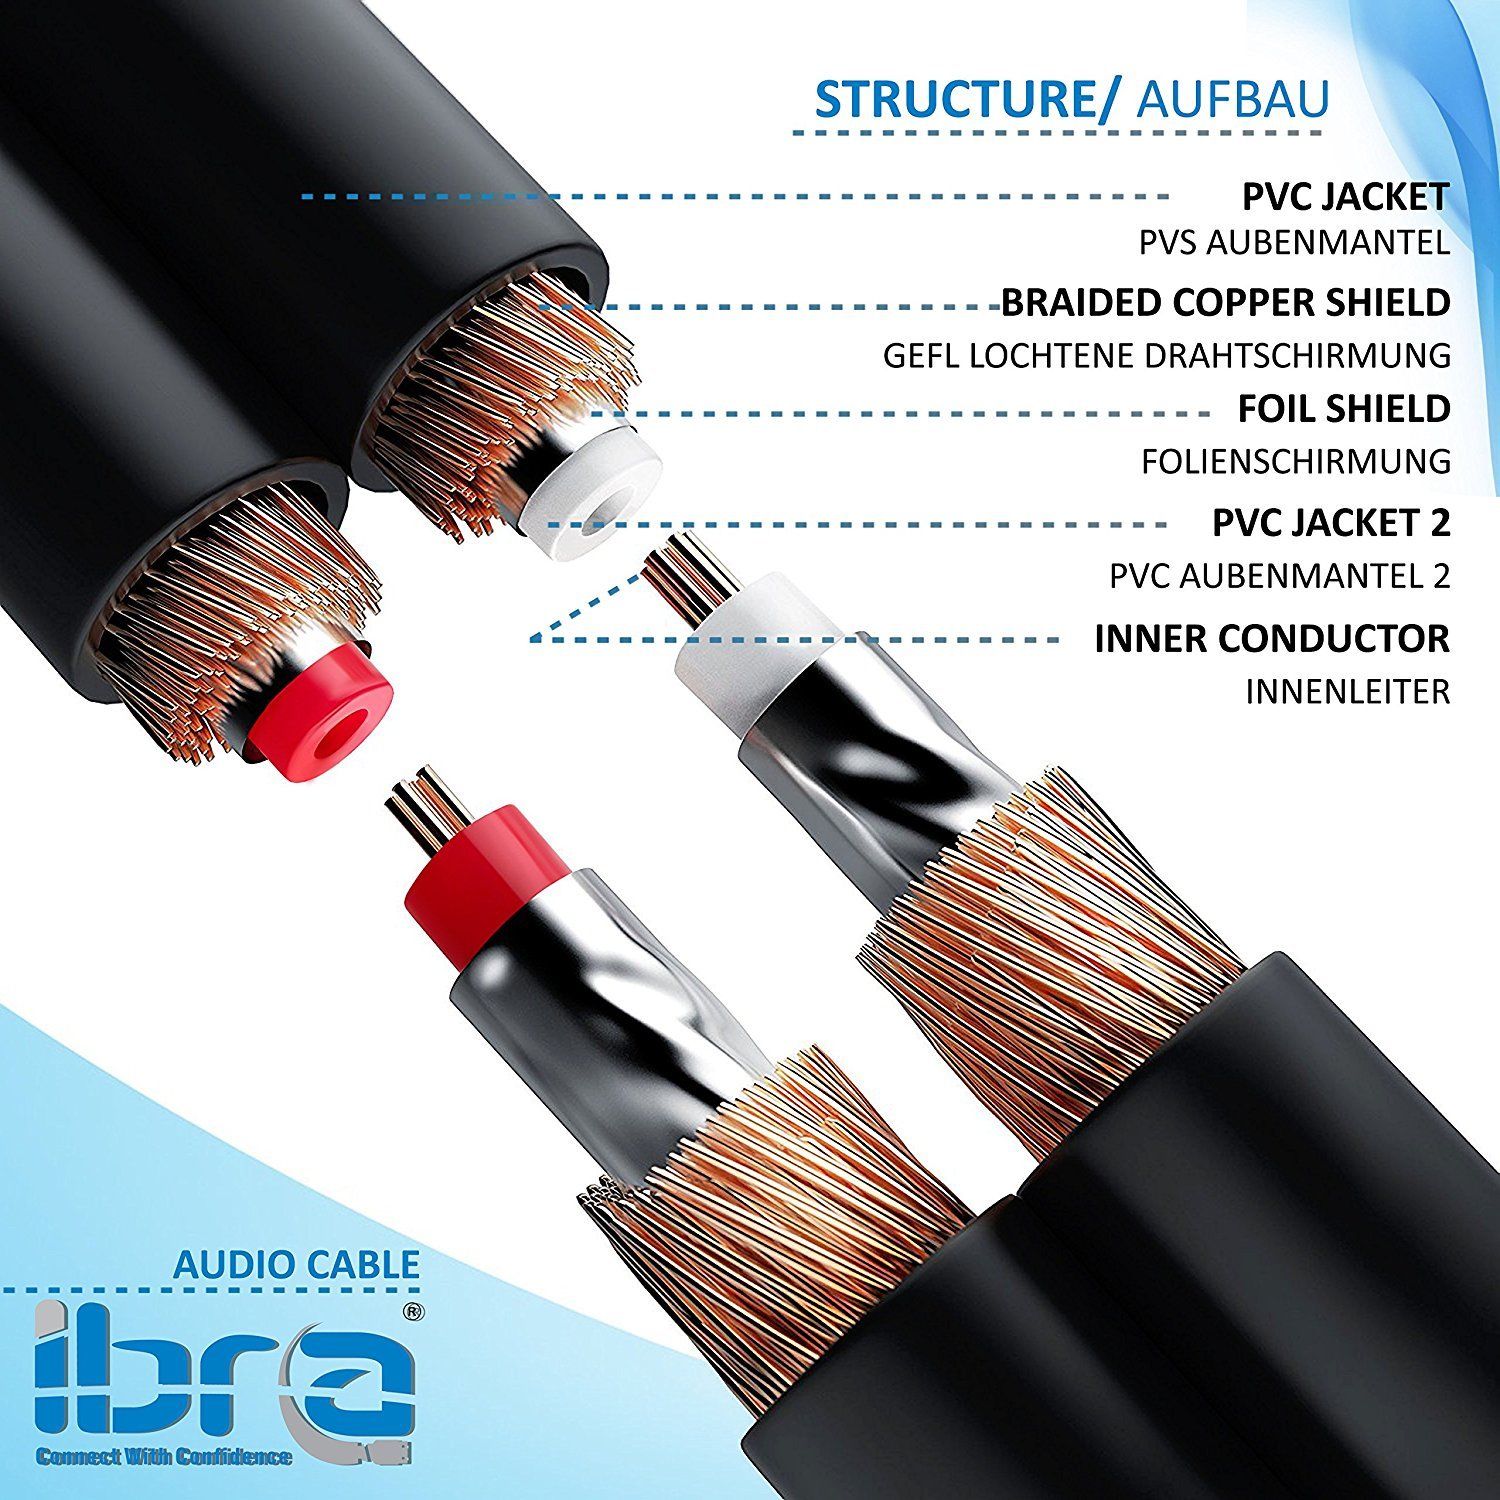 IBRA 20M 2RCA Male to 2RCA Male High Quality Home Theater Audio Cable -2RCA TO 2RCA Cable - Gun Metal Range